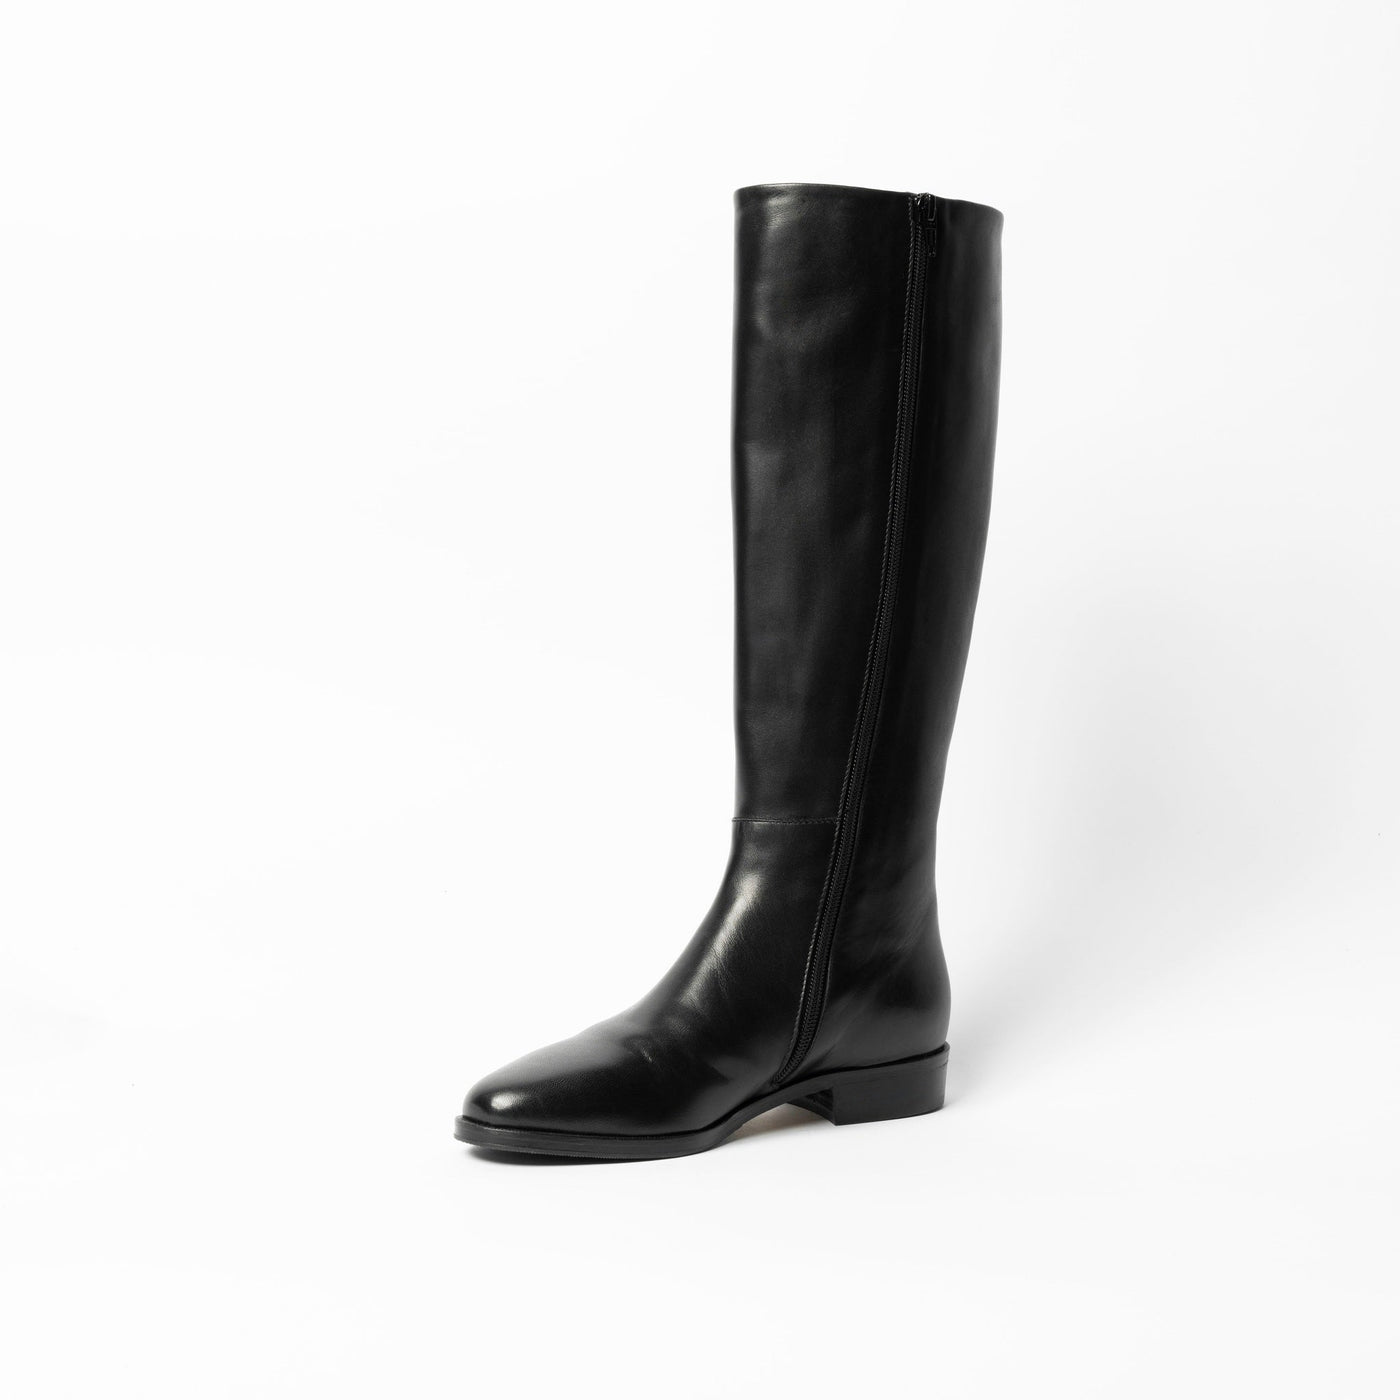 Women's black leather boots. Handmade in Italy. 